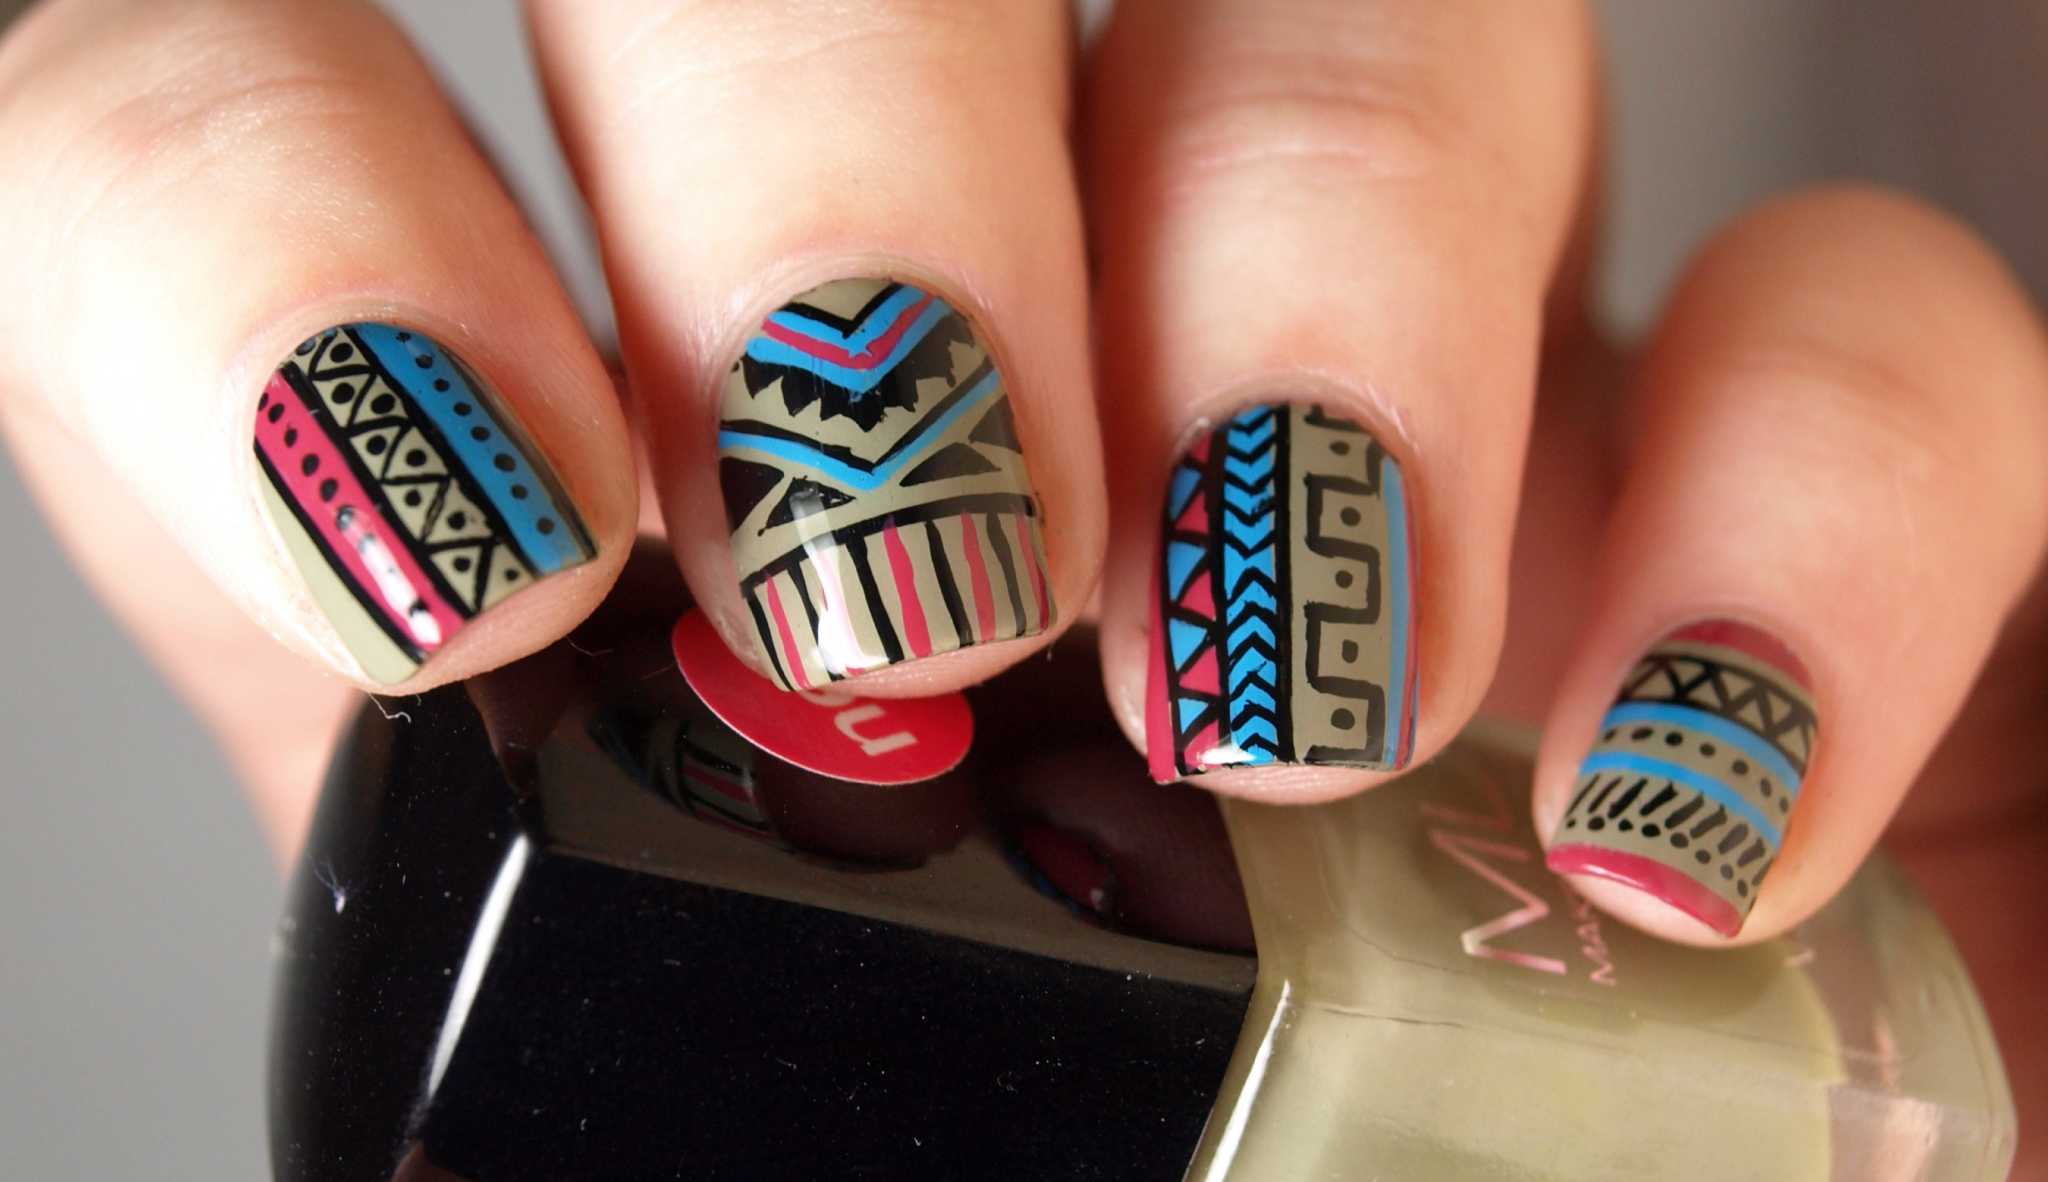 Tribal Nails Design To Embrace Nature - Nail Designs Journal